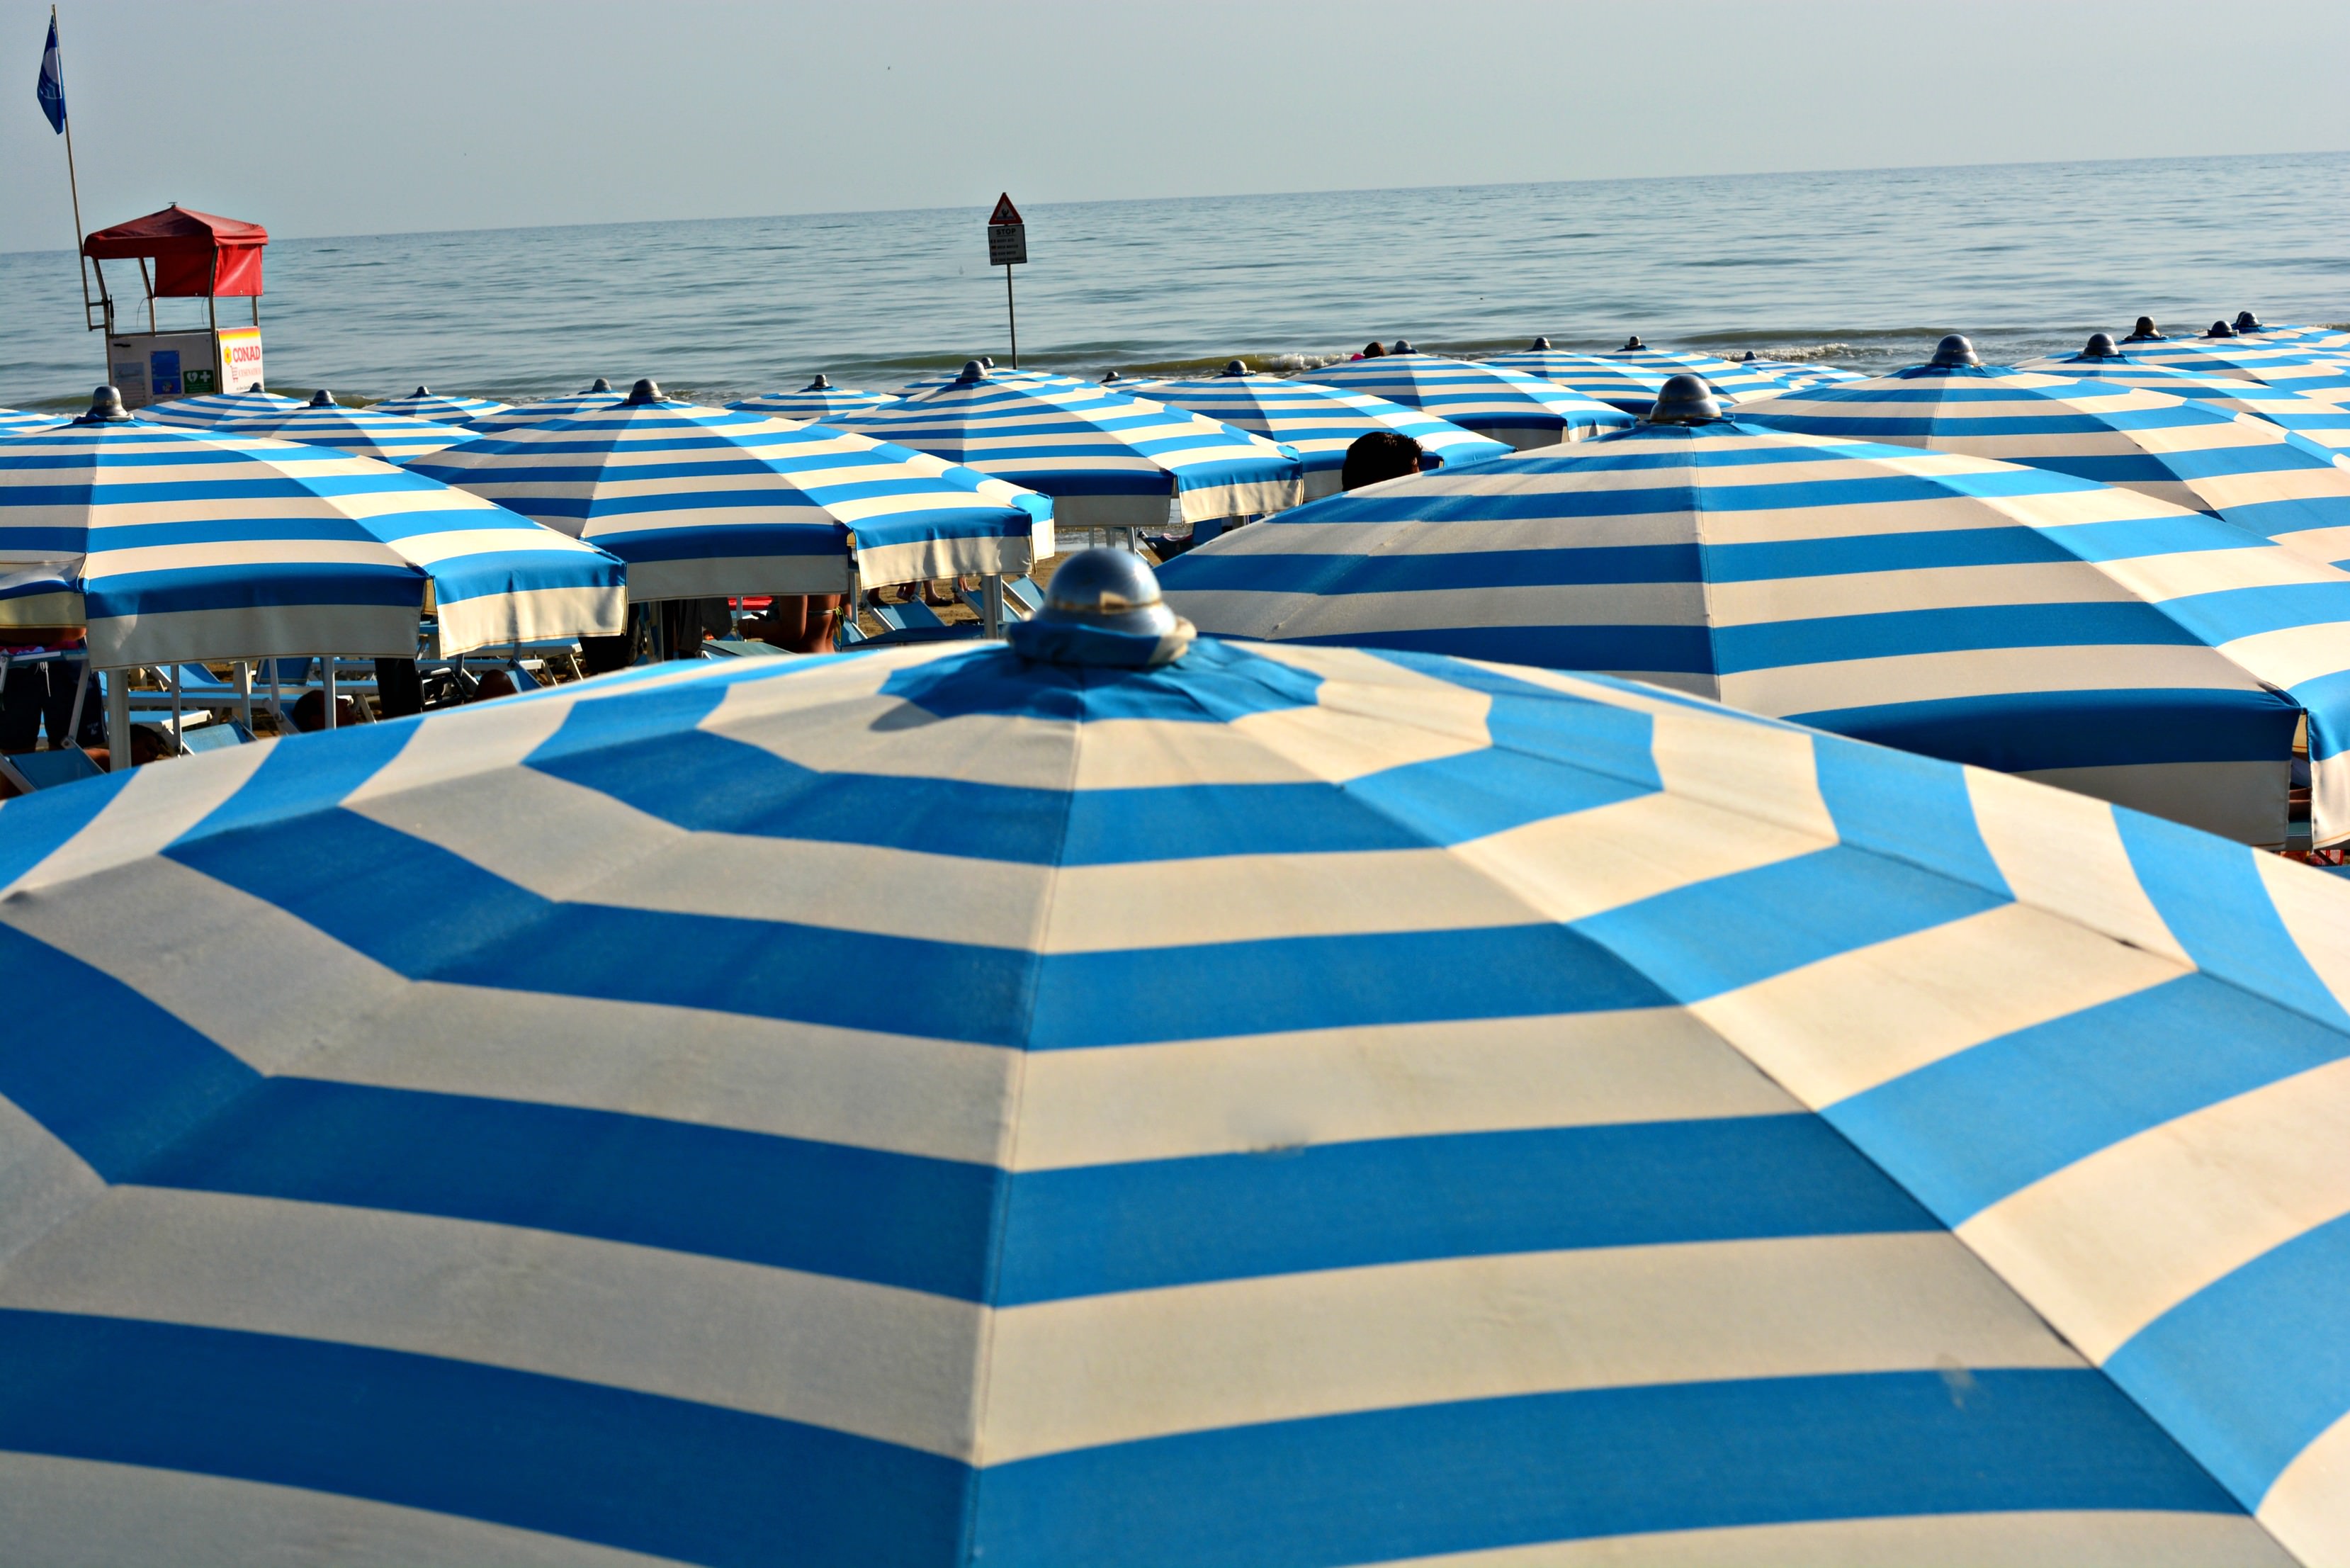 Why I keep going back to Italy | Fashion Food Travel - Over 40 | Blue striped beach umbrellas